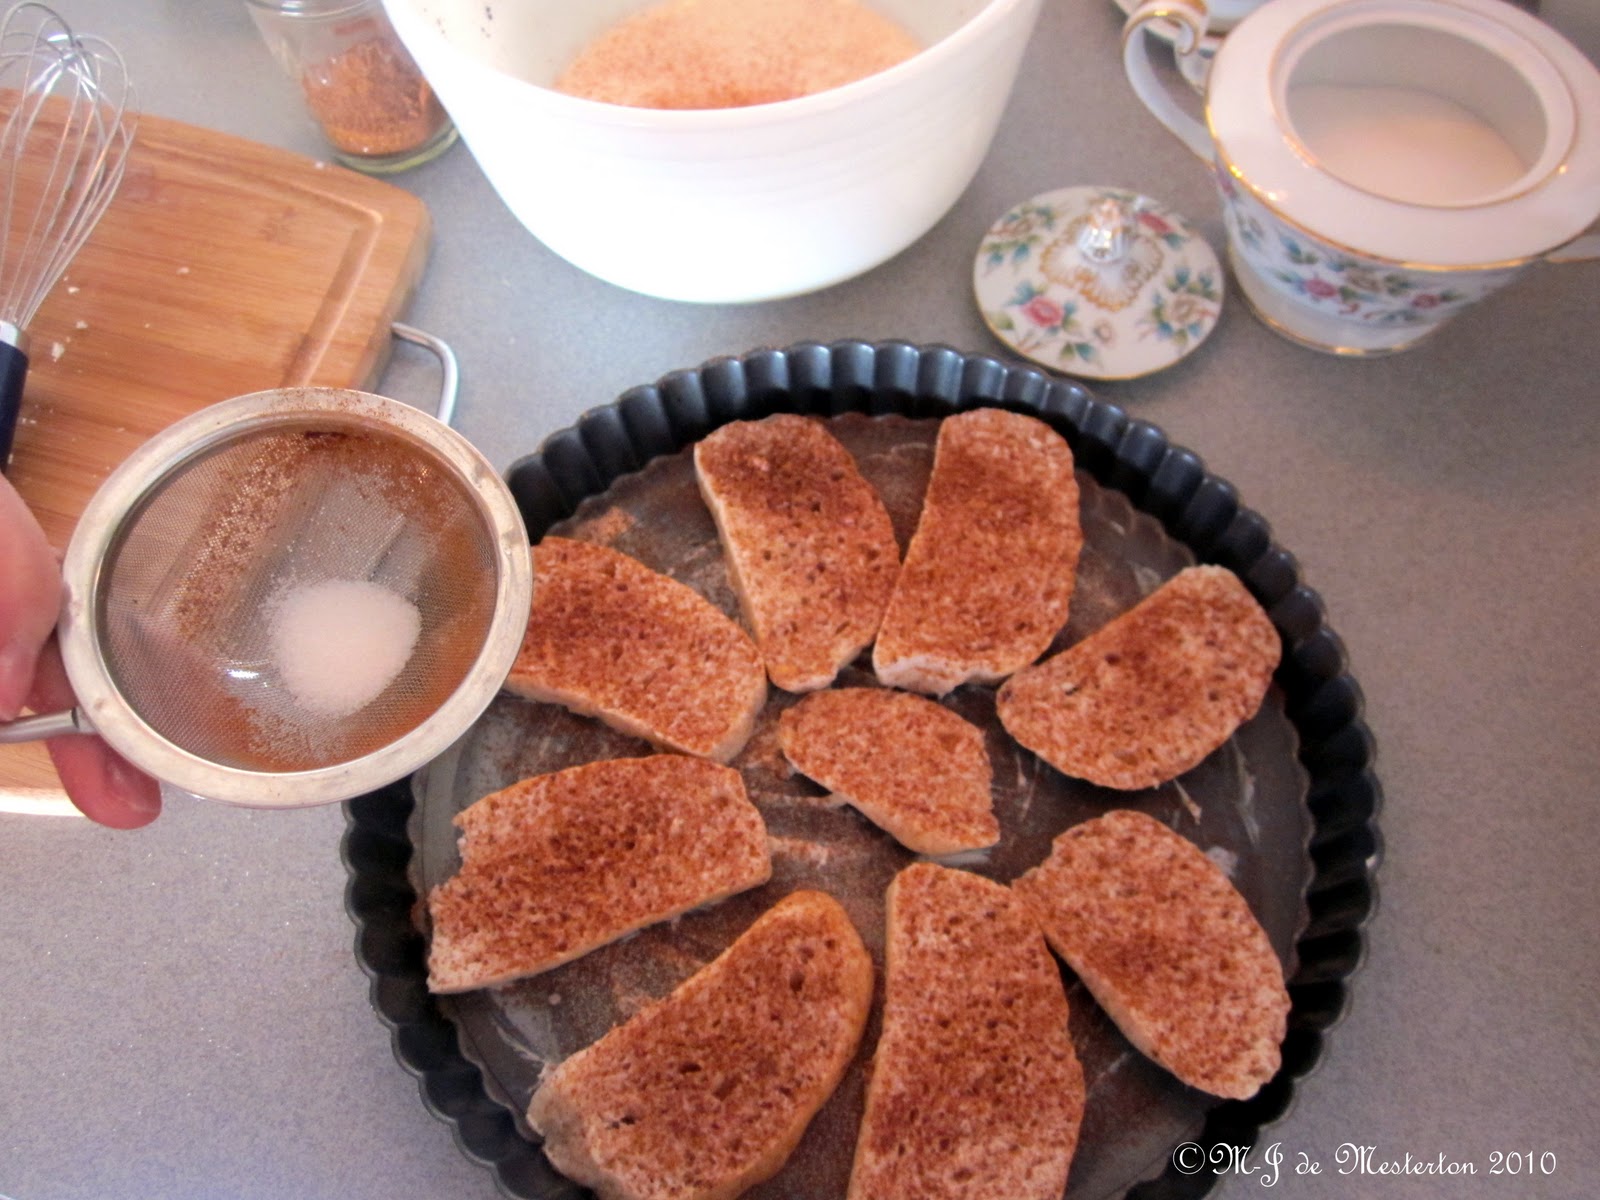 The method and ingredients for making baked cinnamon toast are simple,